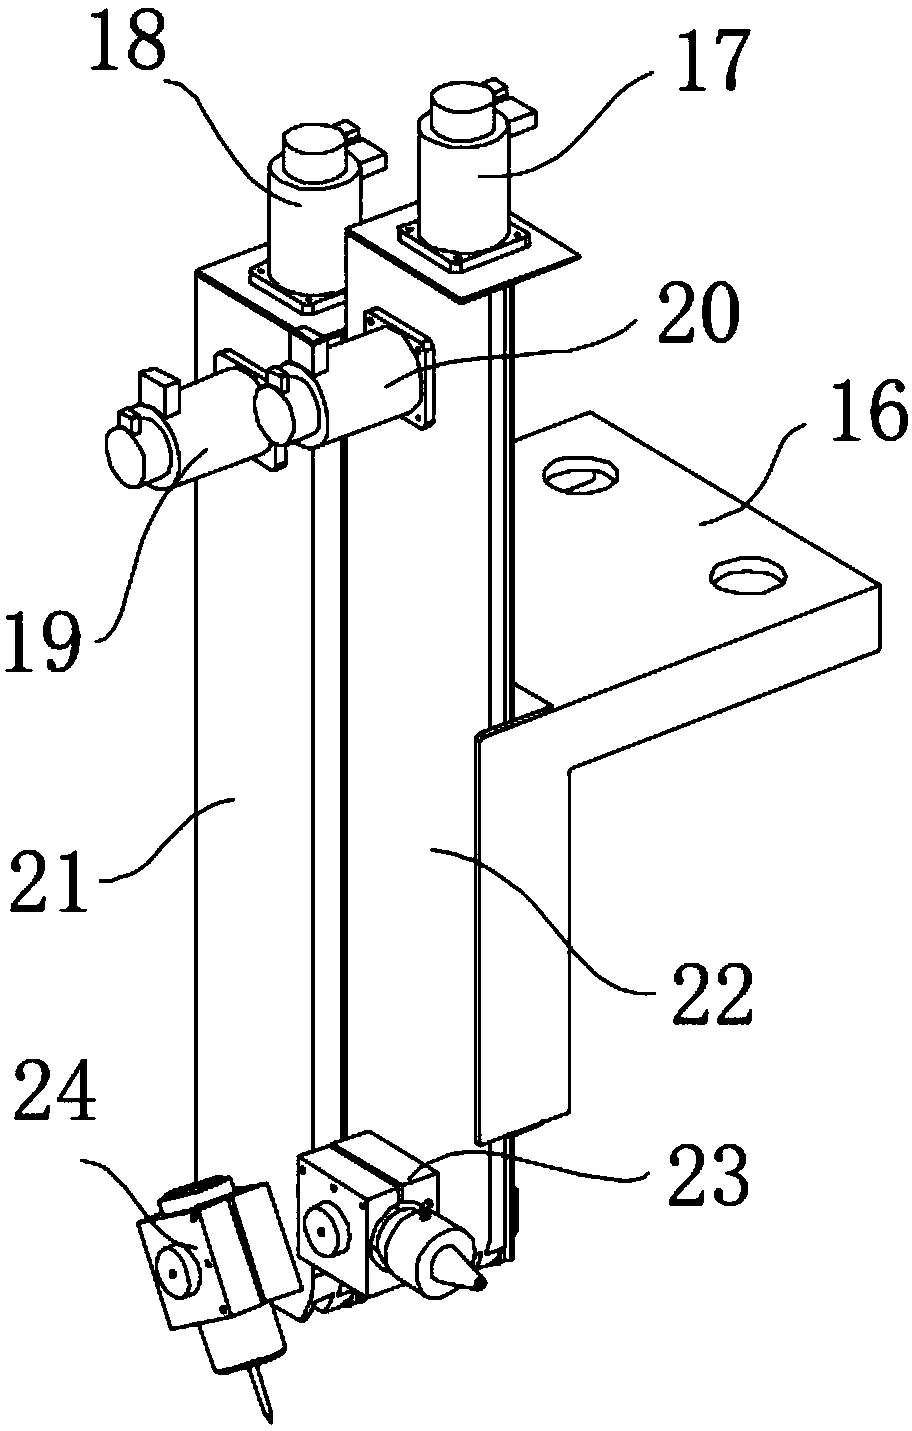 Additive and subtractive laser process machine tool and using method thereof